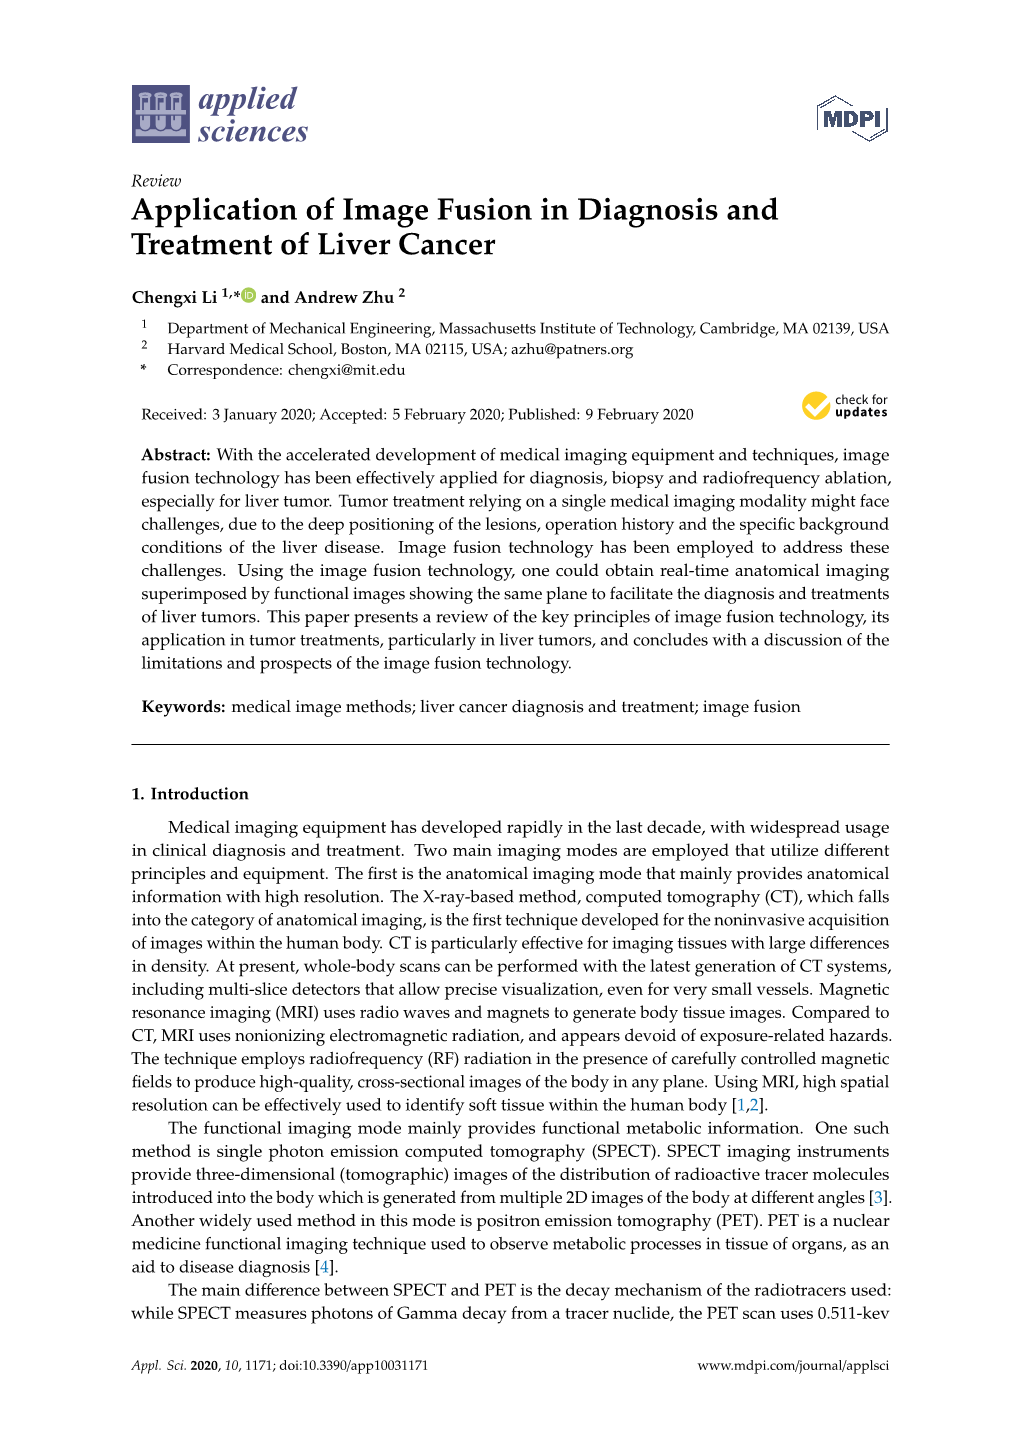 Application of Image Fusion in Diagnosis and Treatment of Liver Cancer